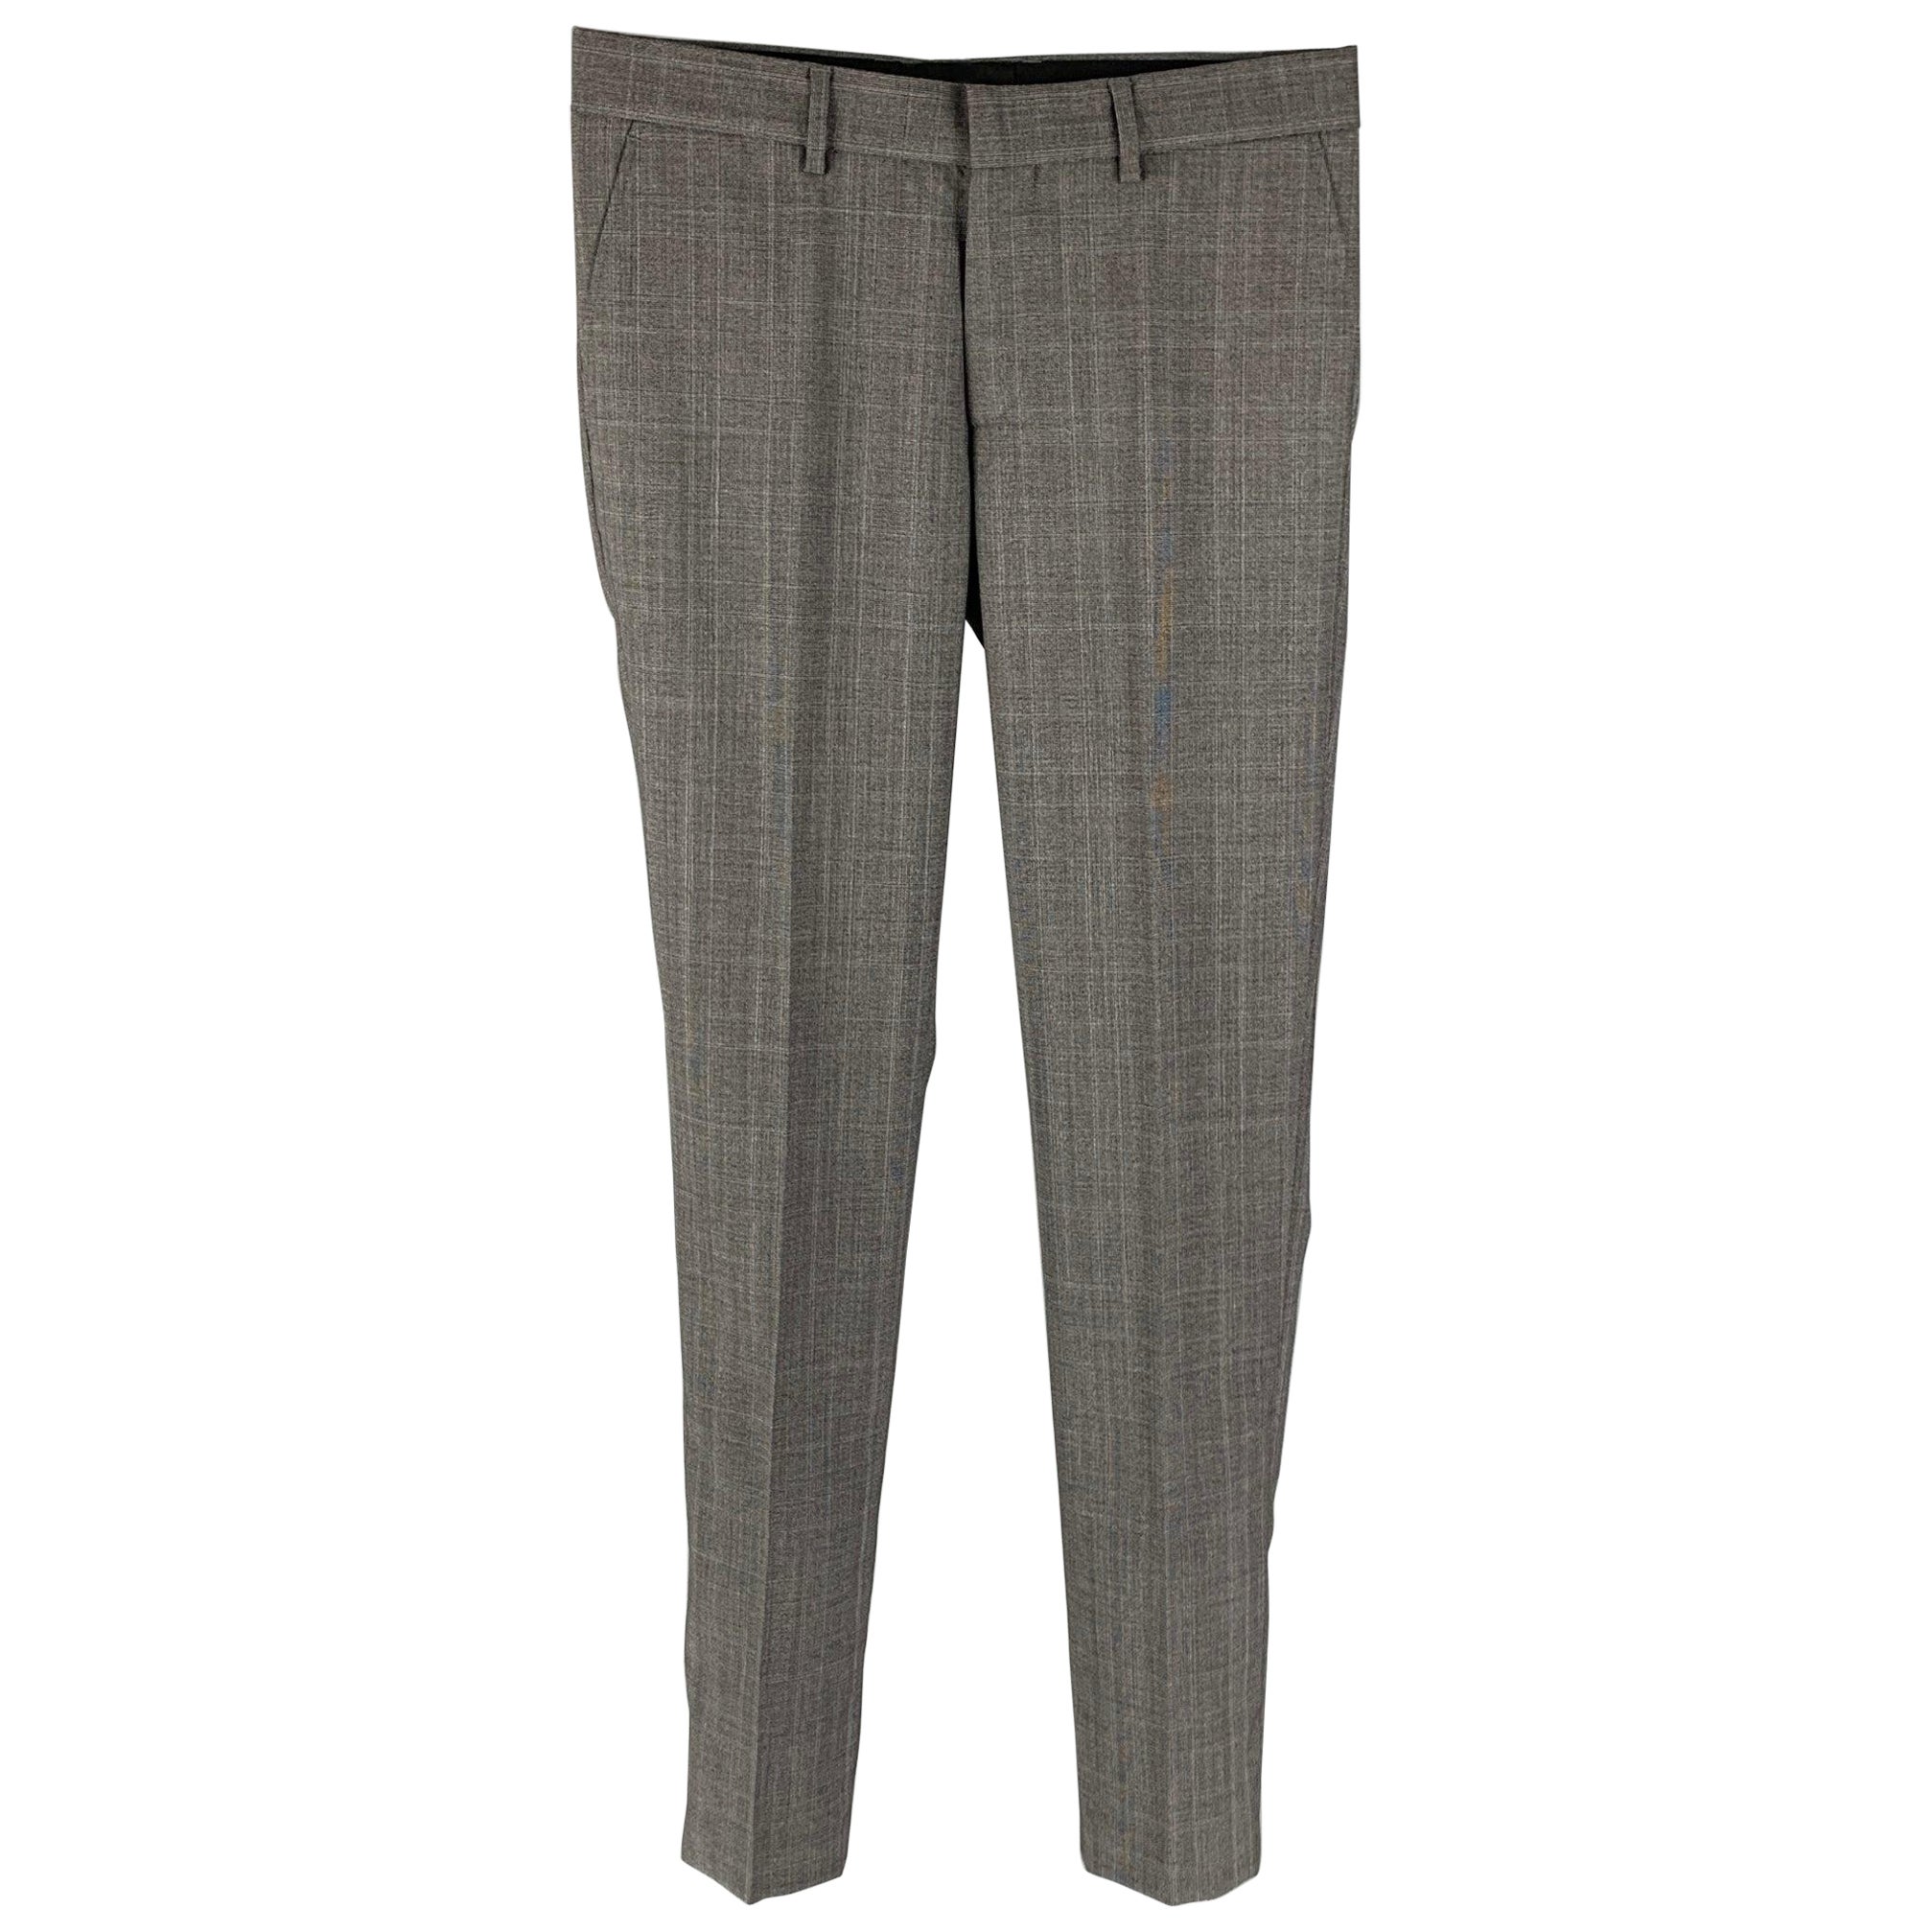 THE KOOPLES Size 30 Grey Plaid Wool Zip Fly Dress Pants For Sale